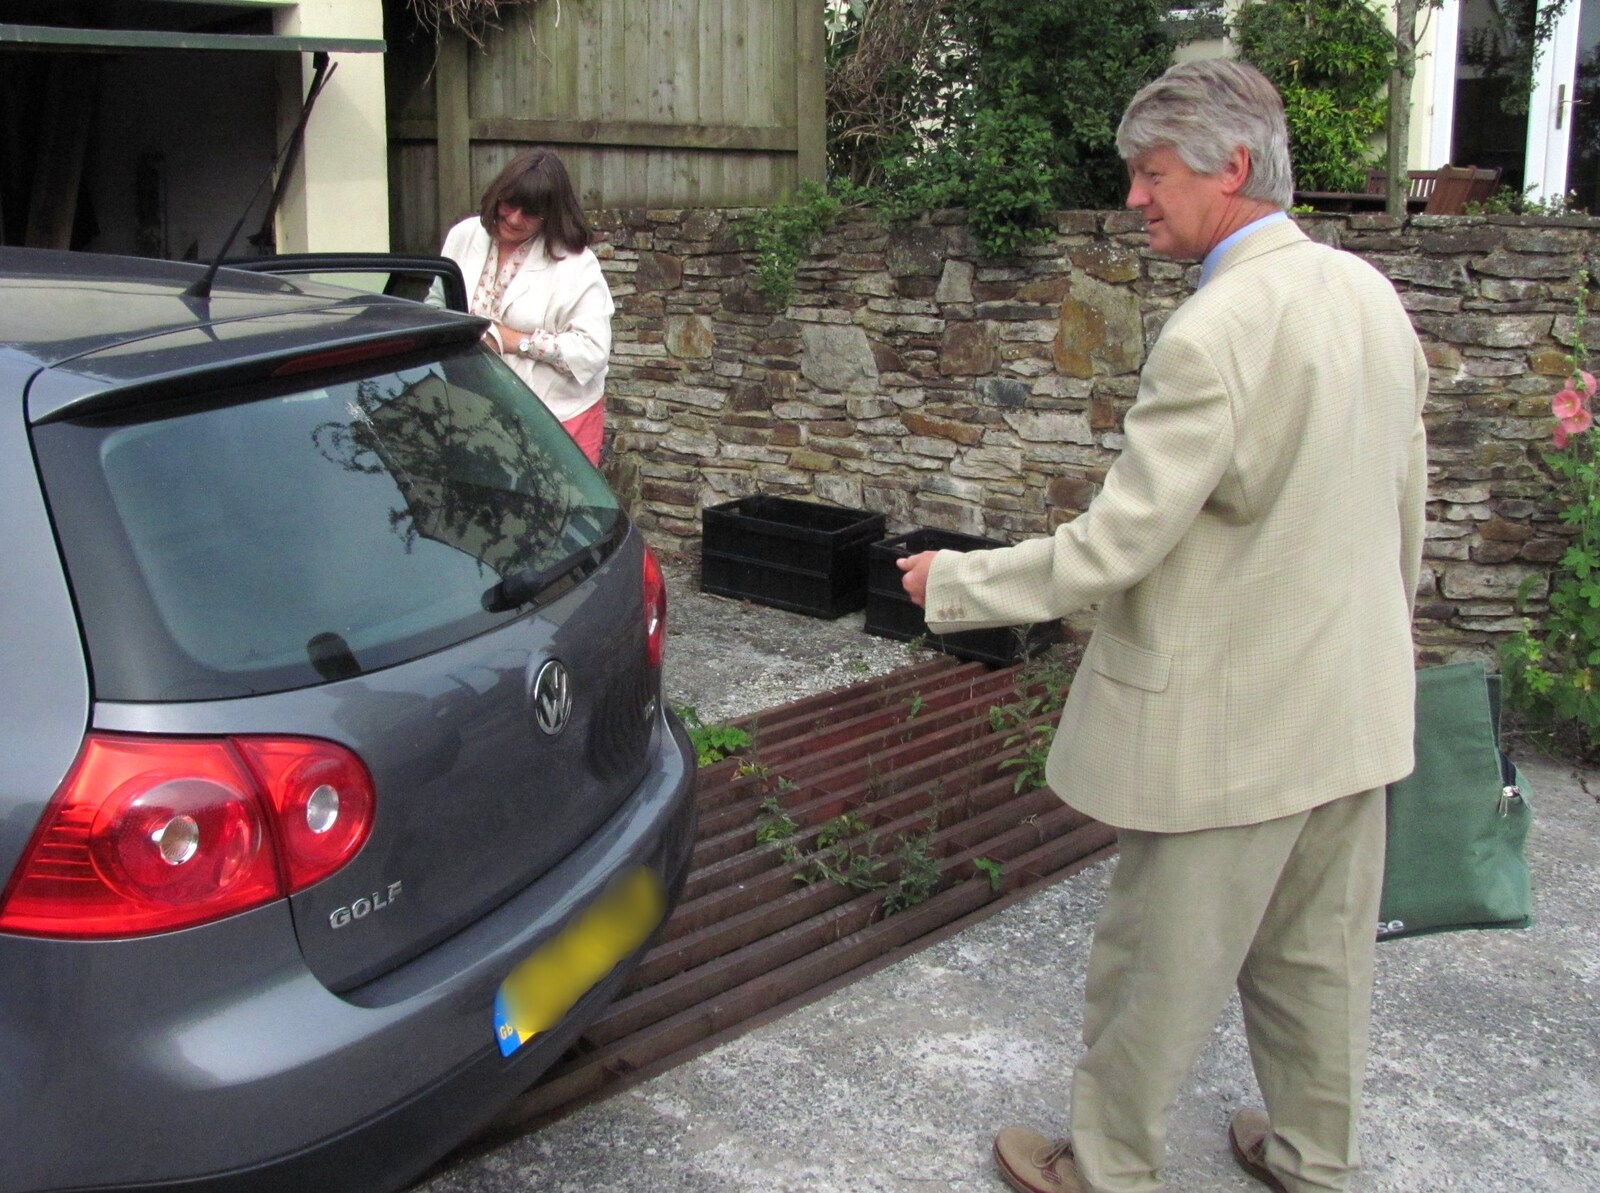 Neil locks his car up back at the Chapel from Mike's Memorial, Prince Hall Hotel, Two Bridges, Dartmoor - 12th July 2011